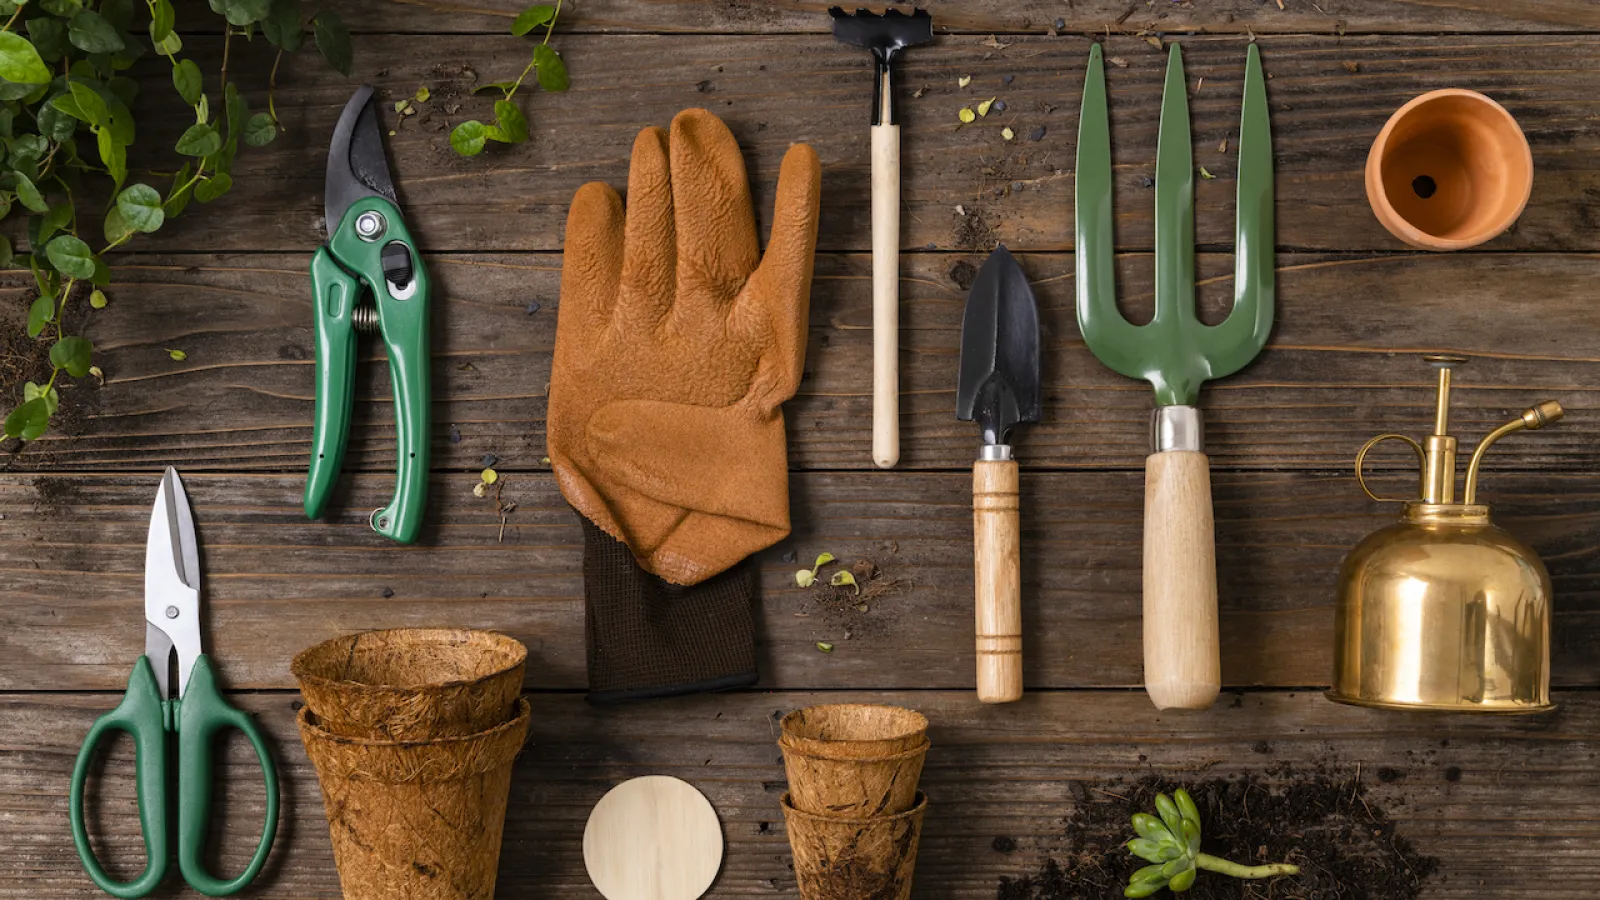 a table with organized gardening tools and objects on it